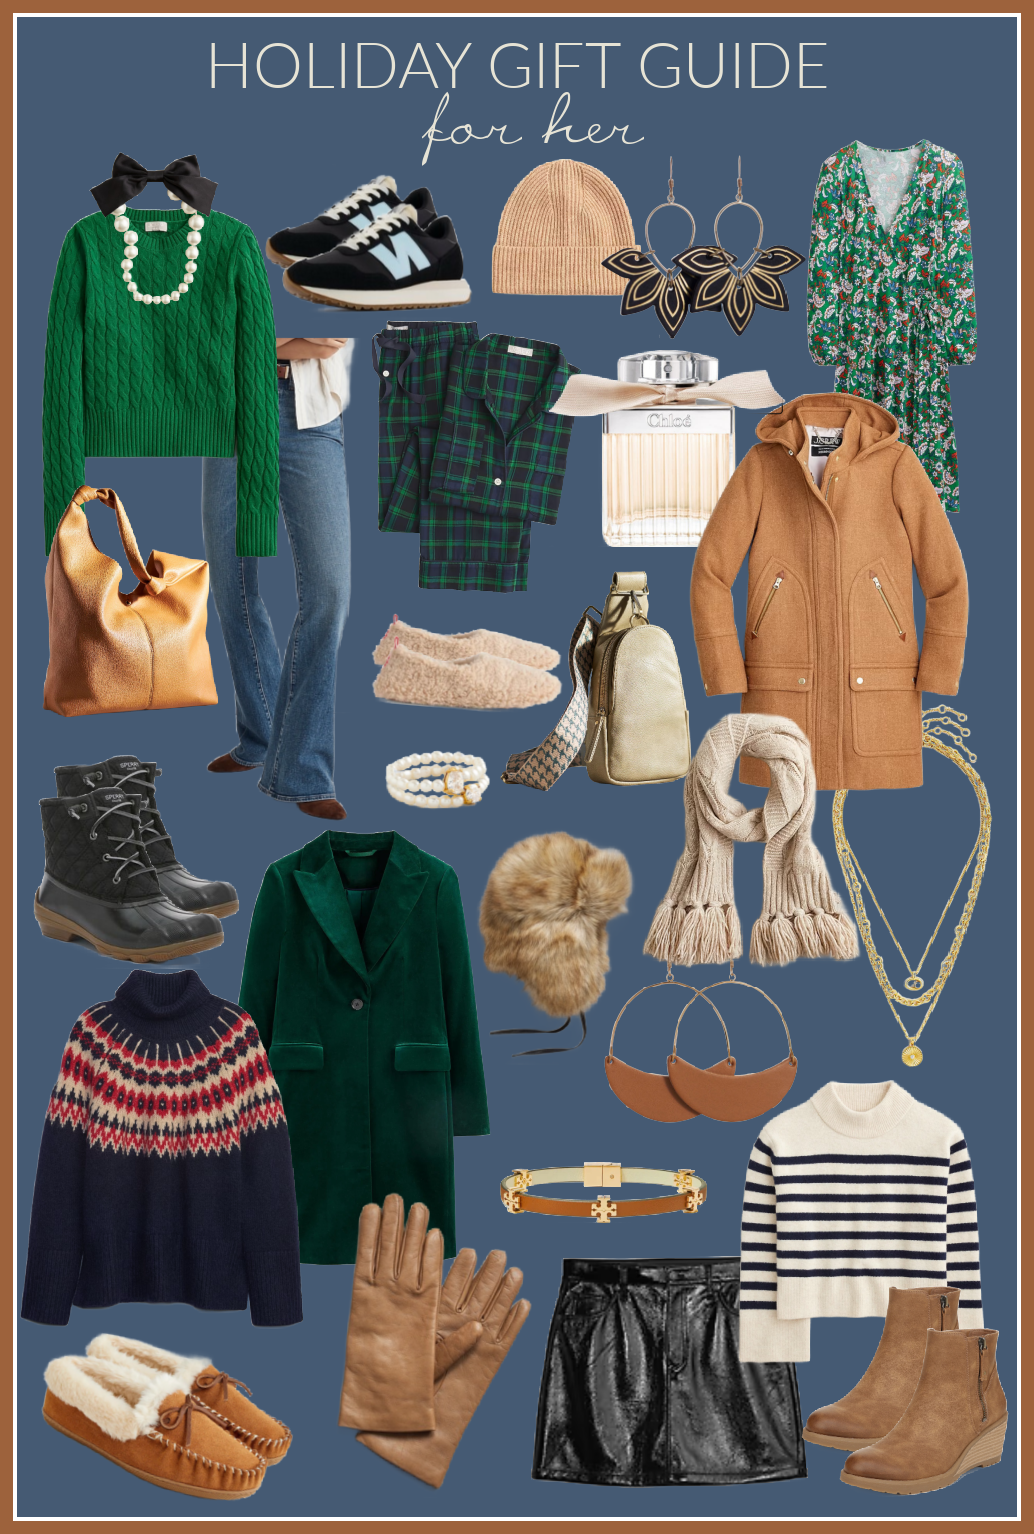 Preppy + Classic Holiday Gift Guide For Her